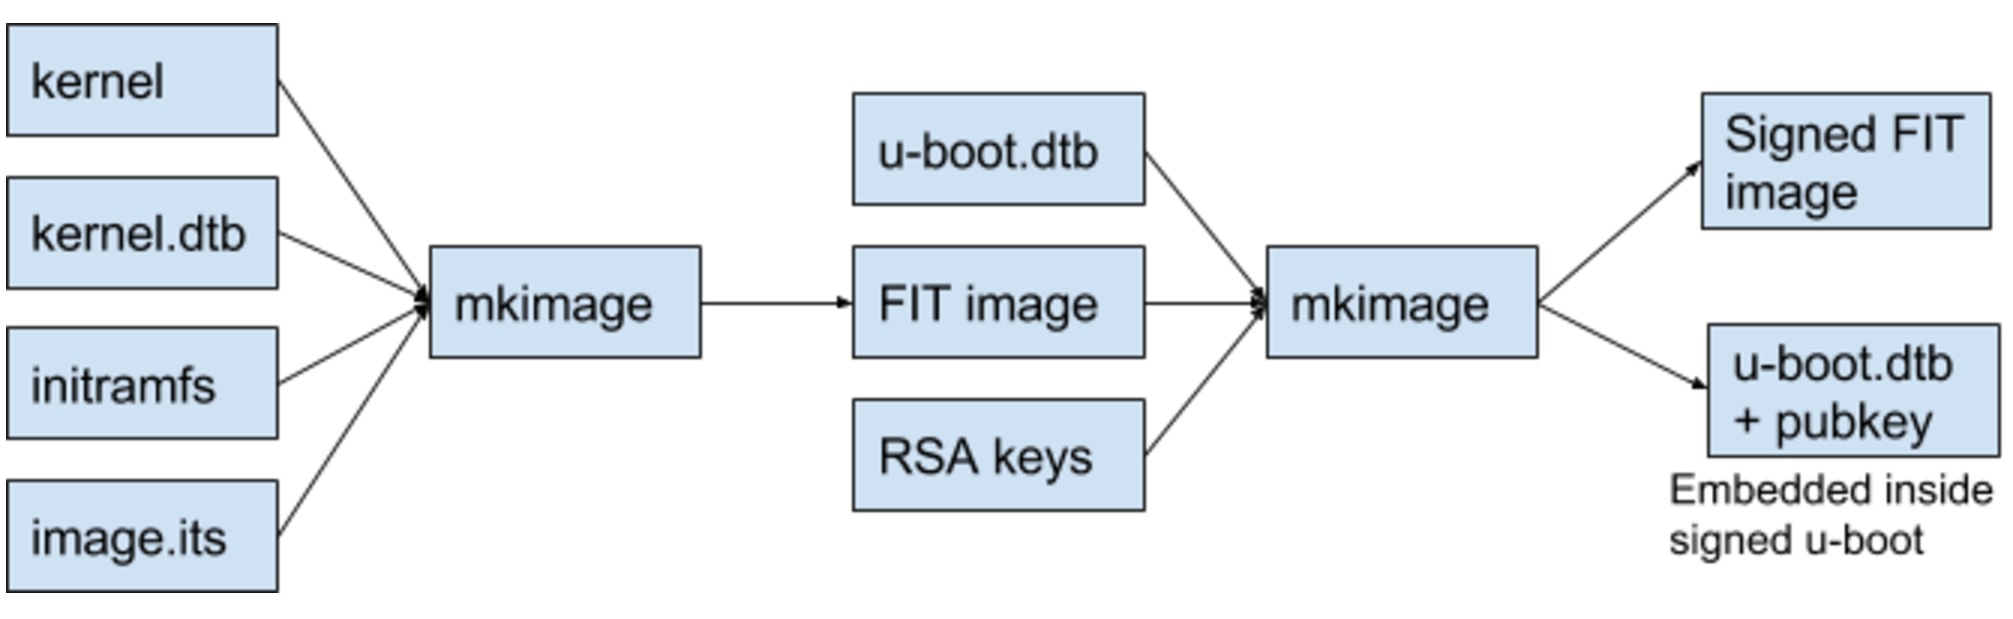 we can trust the public key inside of U-Boot to verify the FIT image